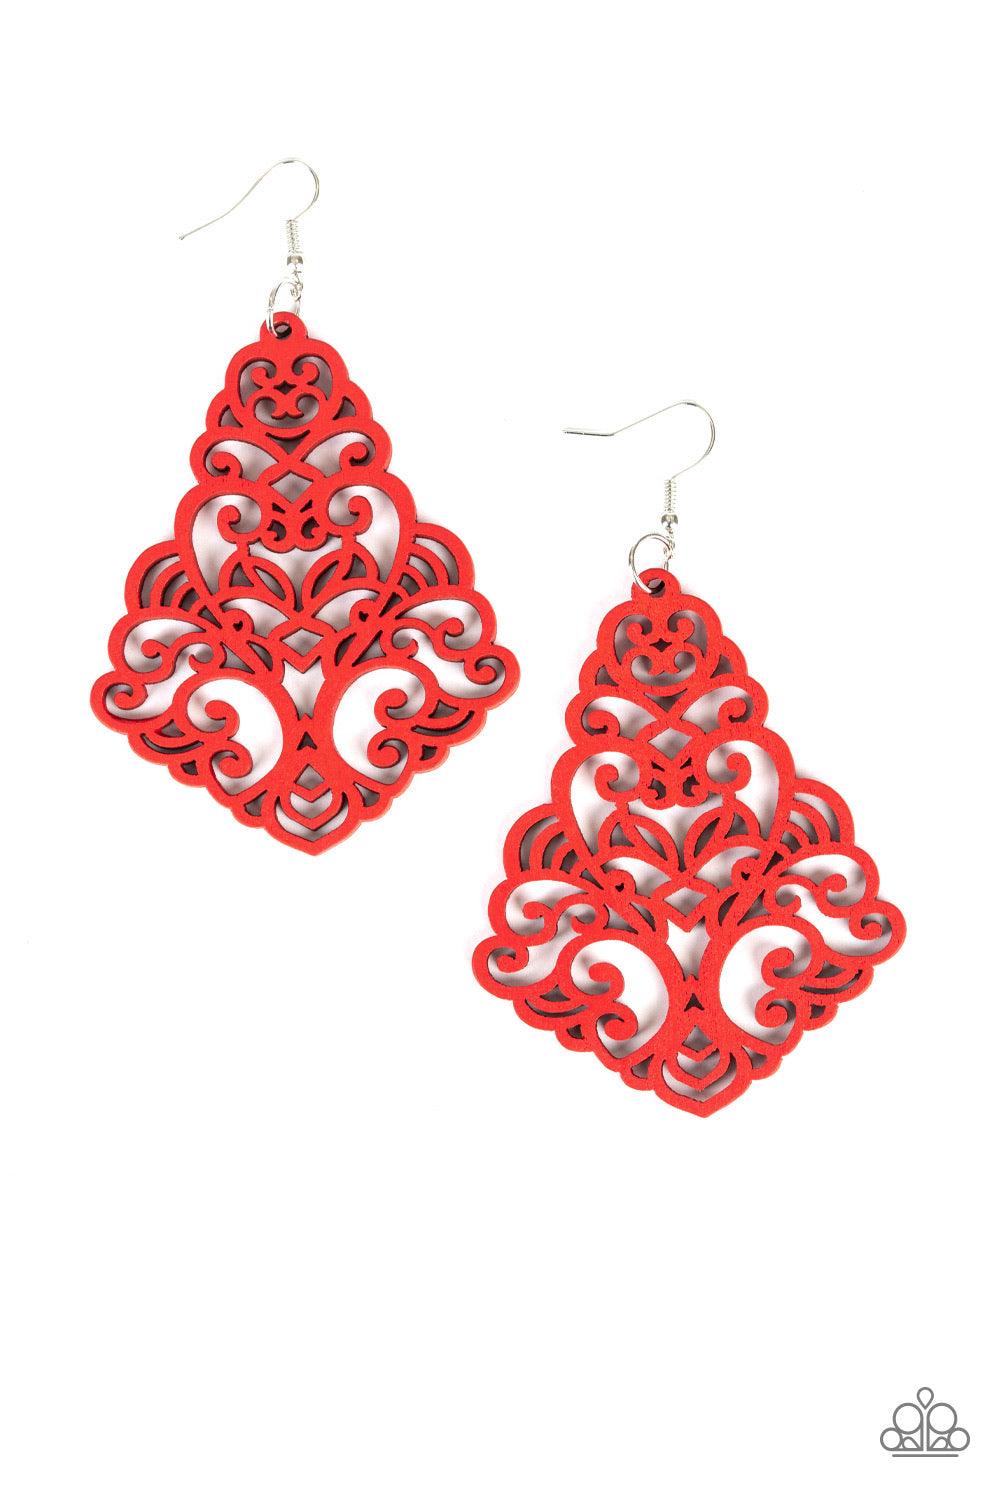 Paparazzi Accessories Powers of Zen - Red Painted in a robust red finish, an airy wooden frame swirling with filigree detail swings from the ear for a seasonal look. Earring attaches to a standard fishhook fitting. Jewelry